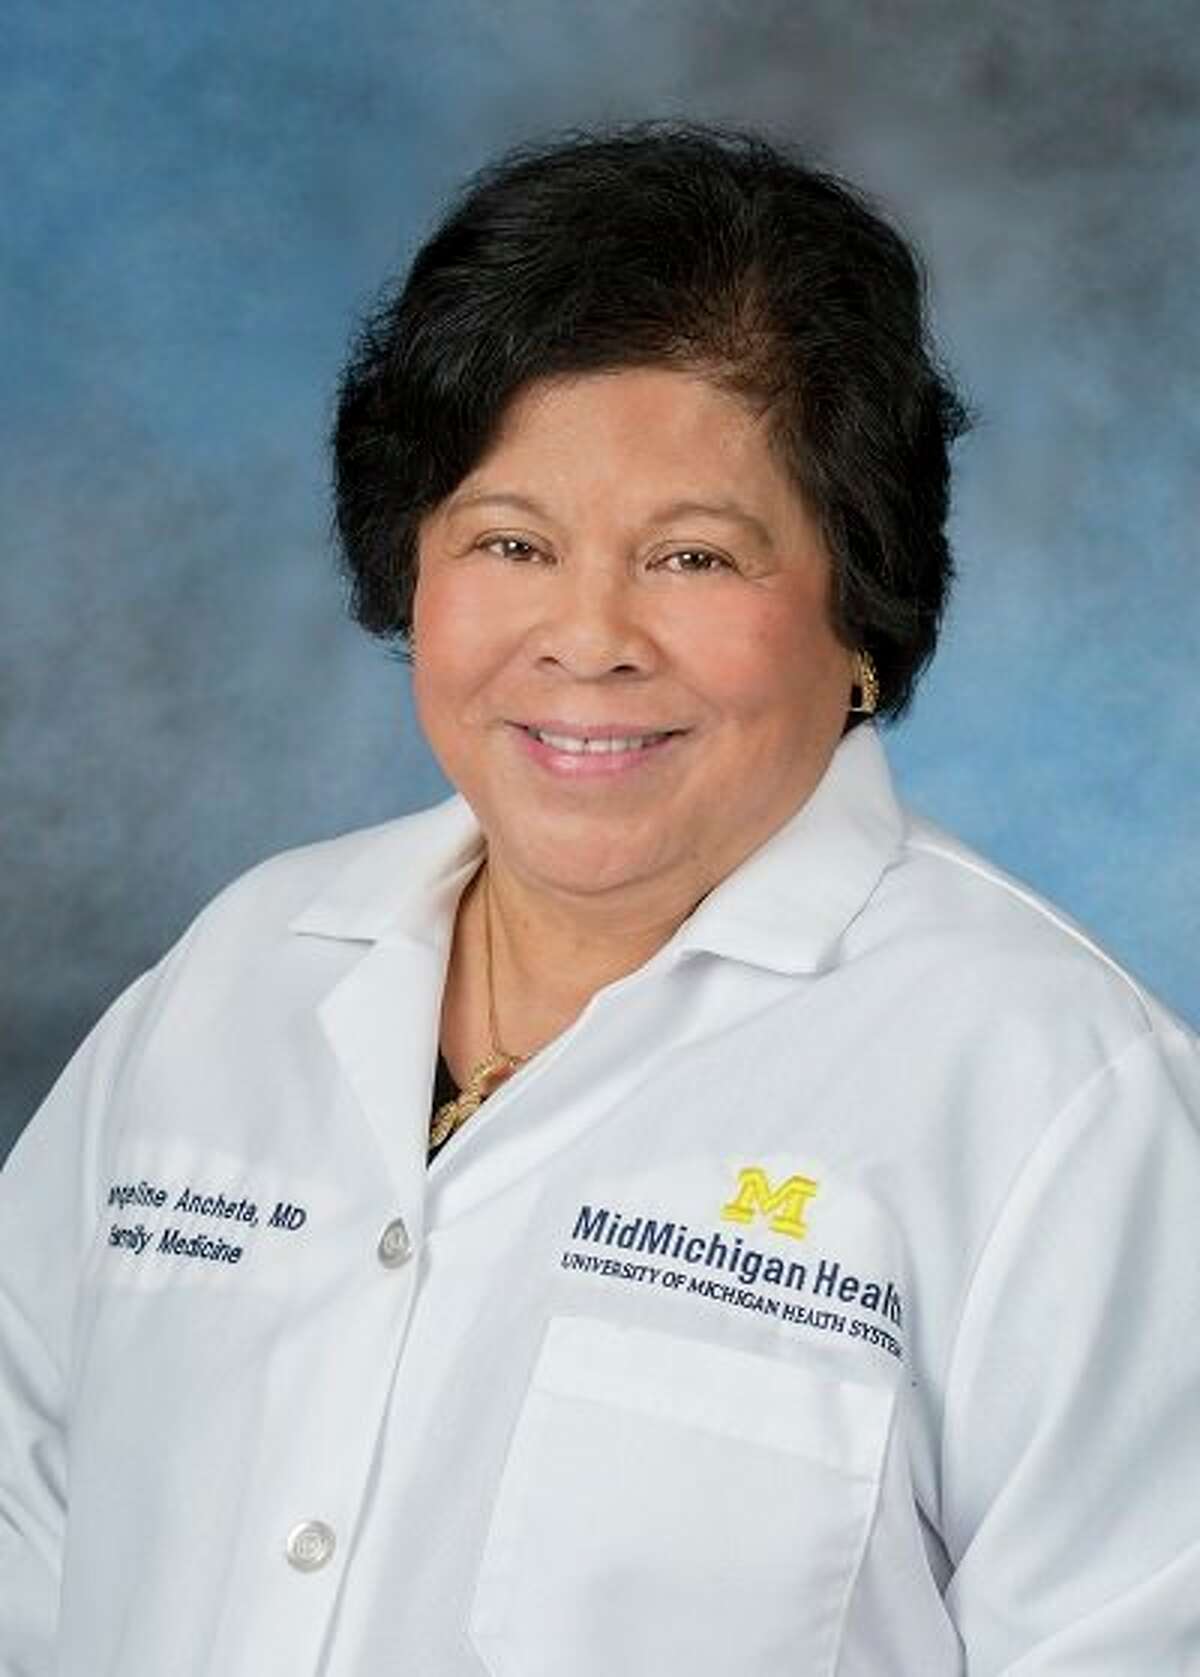 Evangeline Ancheta, M.D.retires after practicing medicine for over 36 years. (Provided Photo)